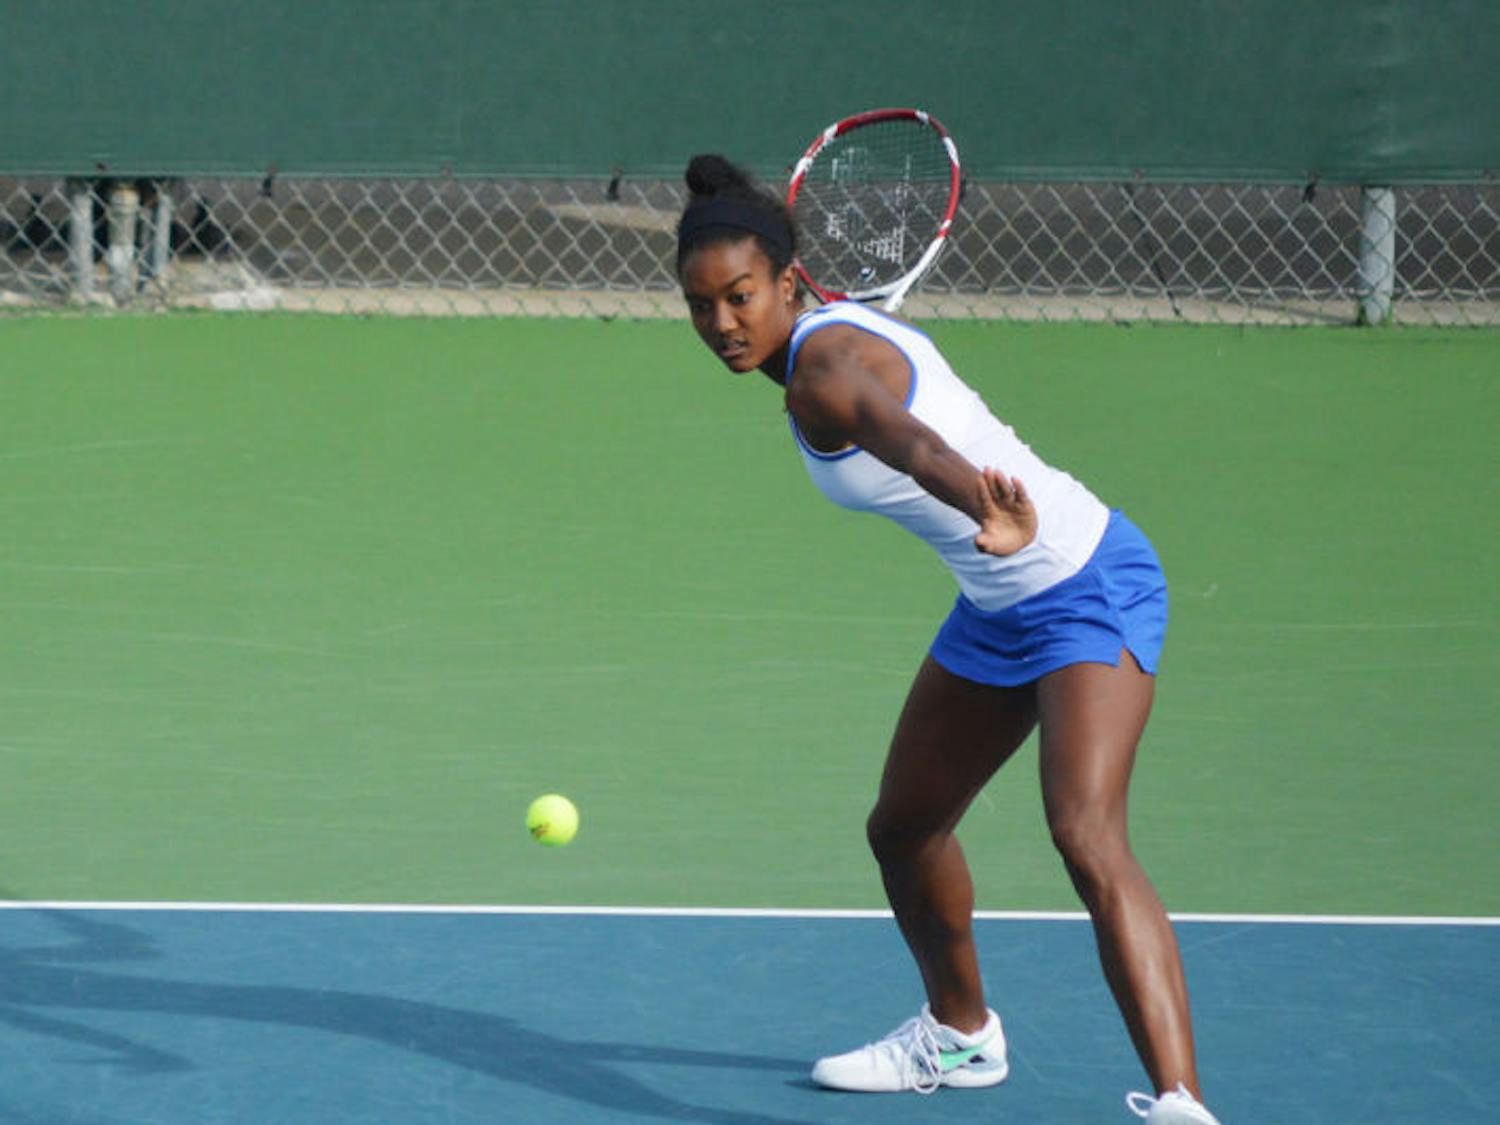 Brianna Morgan swings at the ball during Florida’s 4-0 win against Harvard on Jan. 26 at the Ring Tennis Complex.